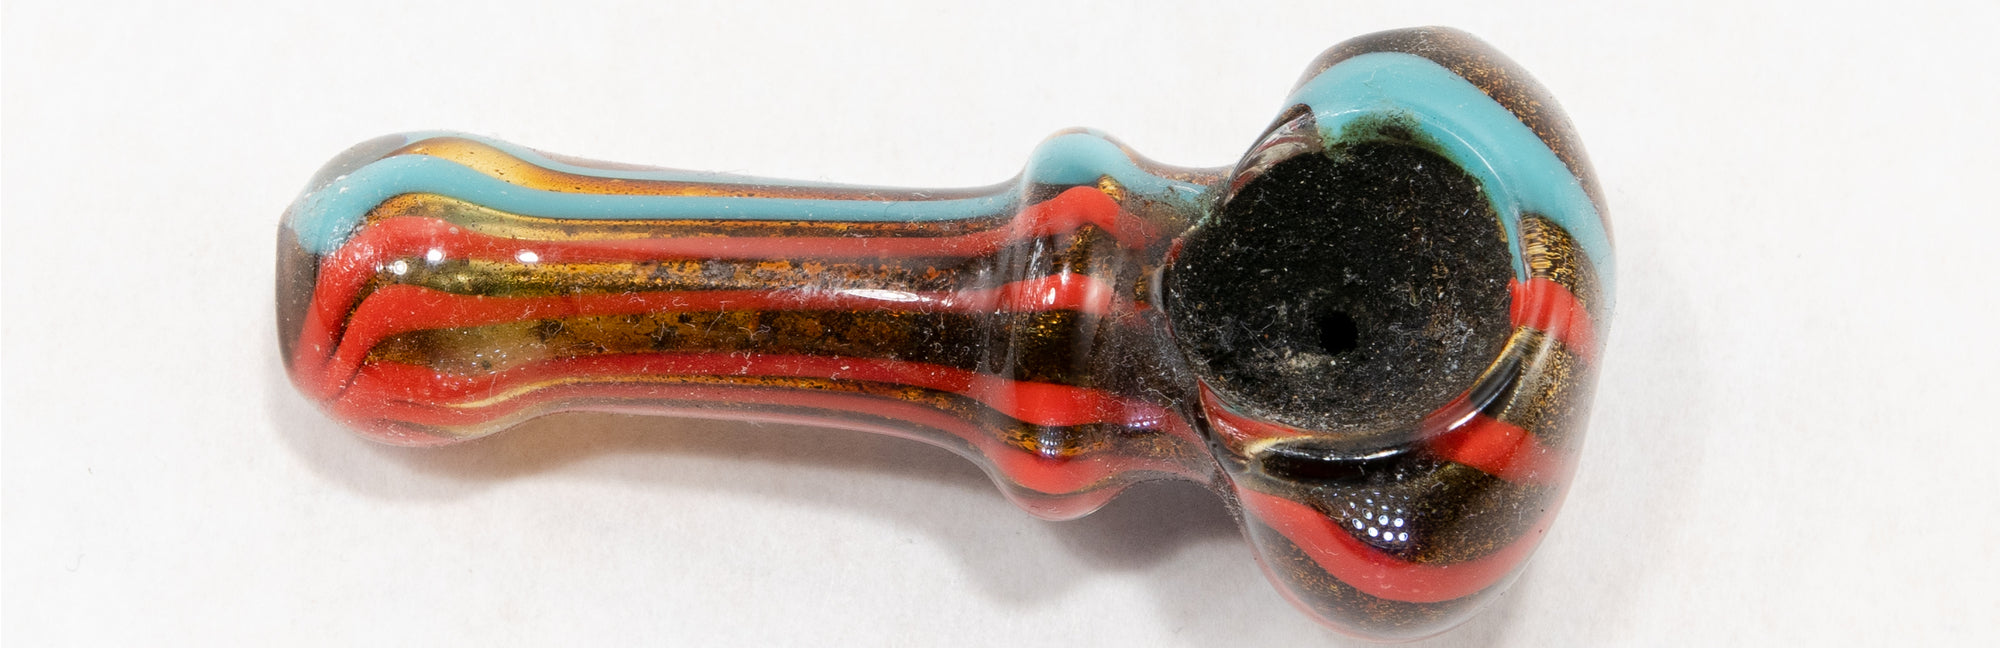 5 Best Cleaners for Marijuana Pipe